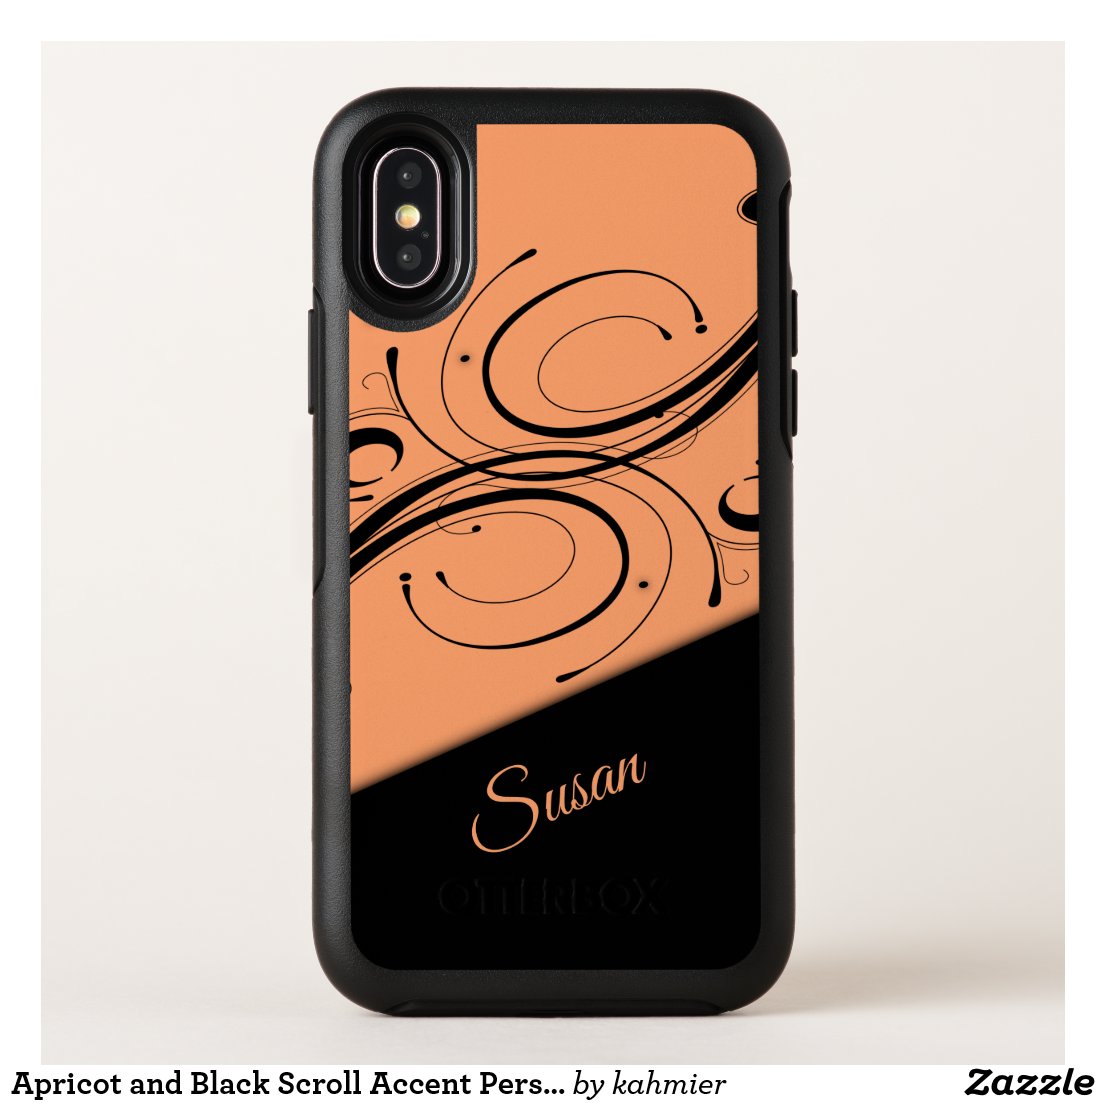 Apricot and Black Scroll Accent Personal OtterBox iPhone Case